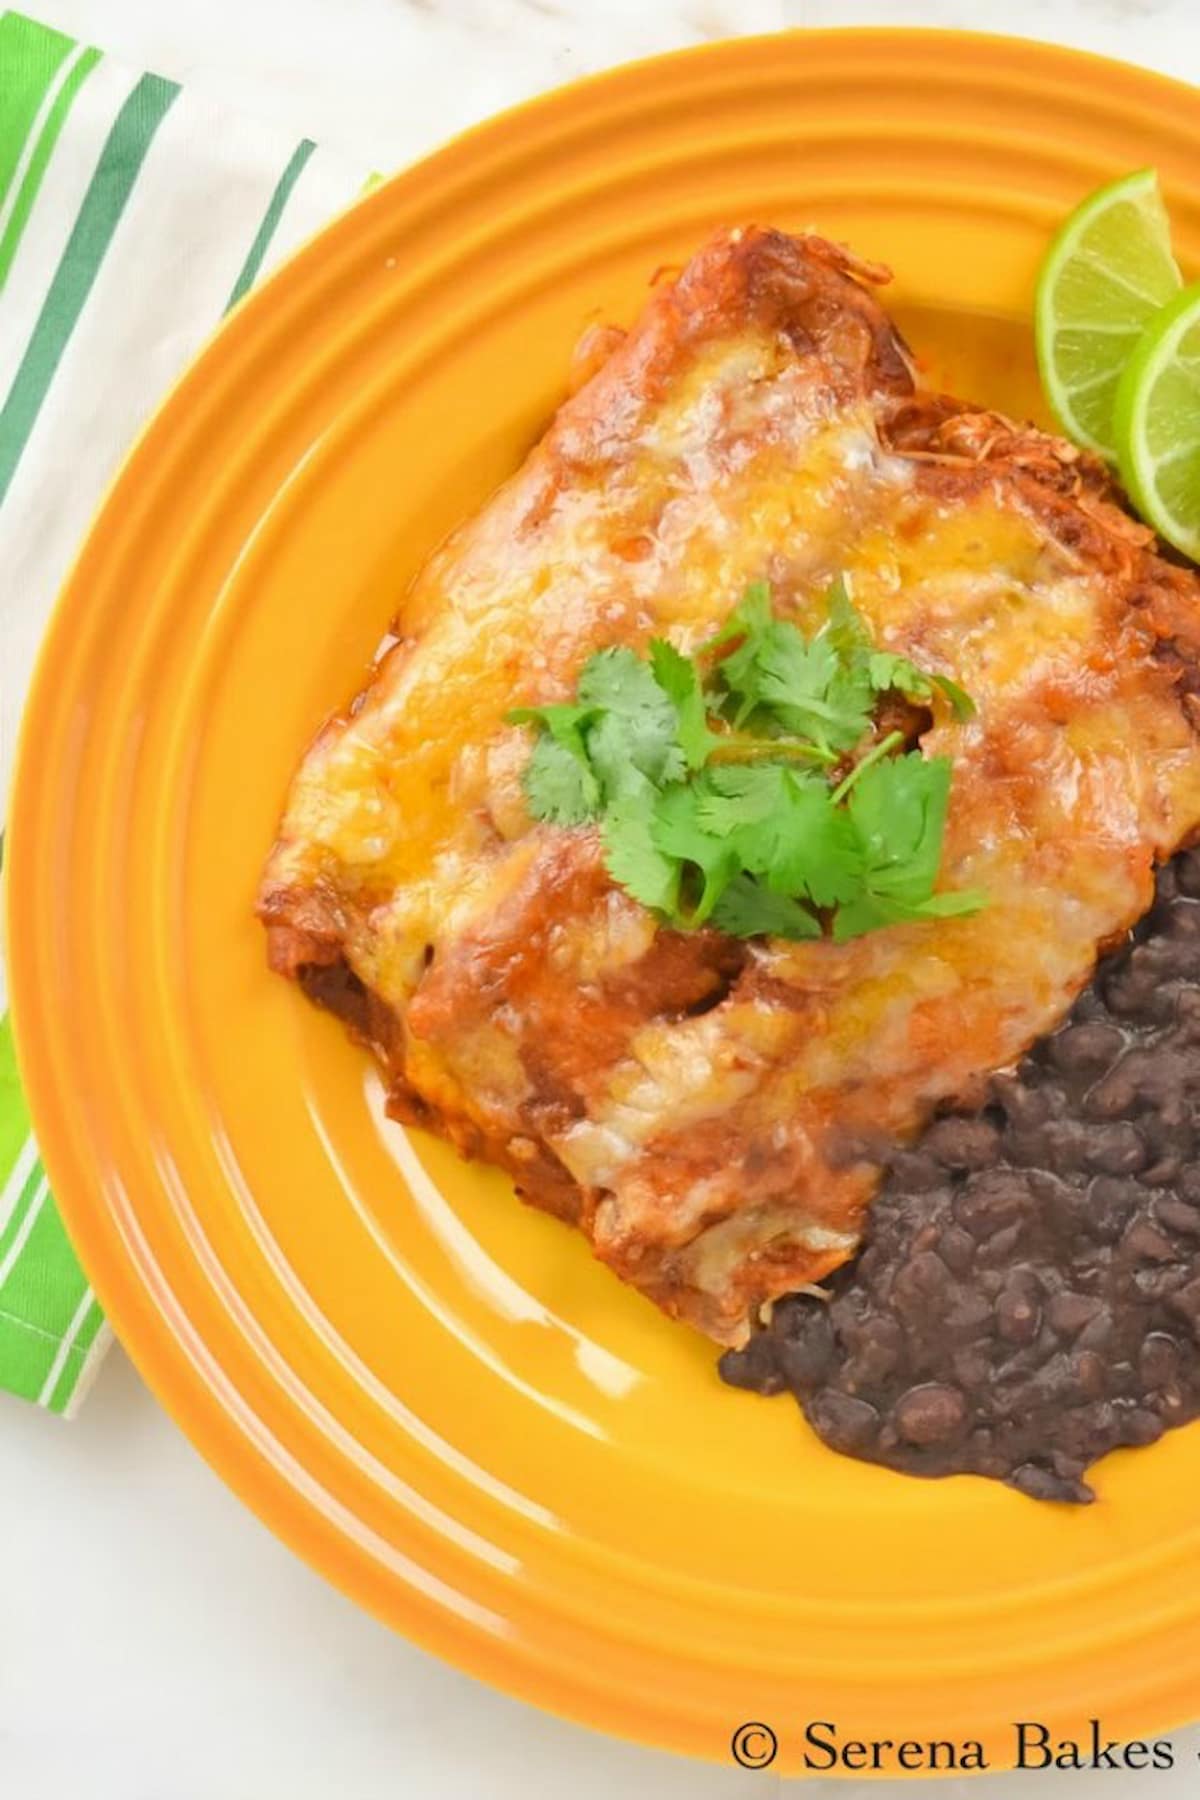 Chicken Enchiladas in Homemade Red Enchilada Sauce on a yellow plate served with refried black beans.